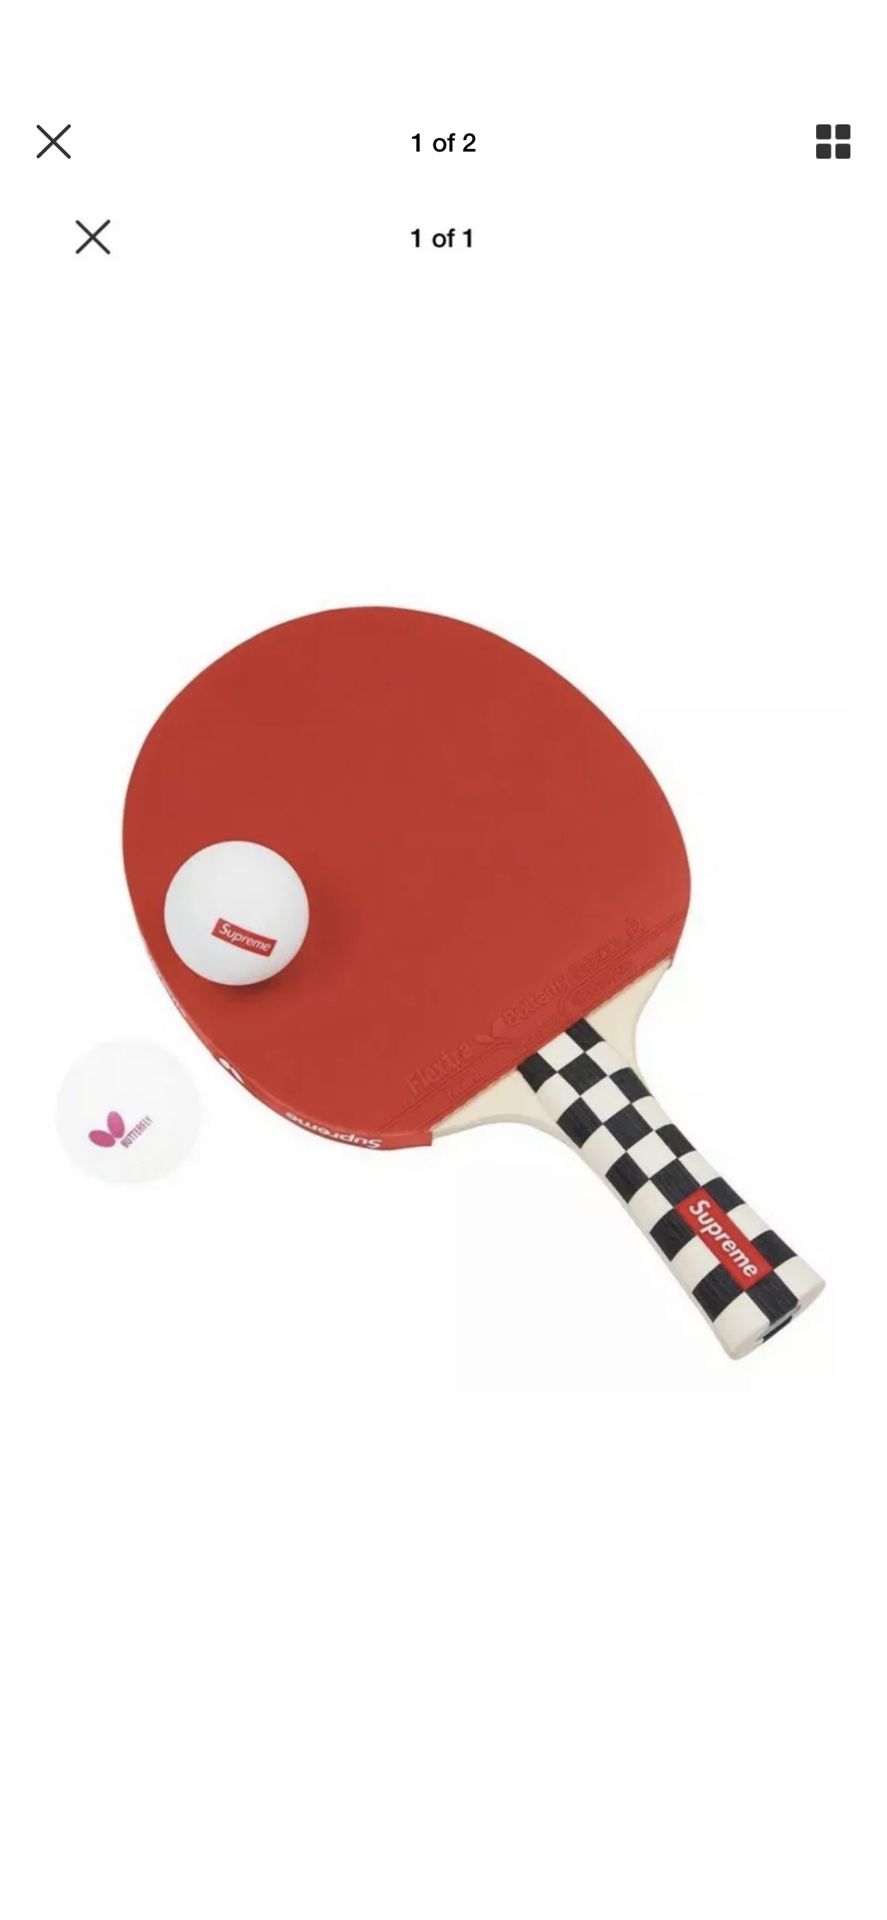 Supreme butterfly table ping pong racket